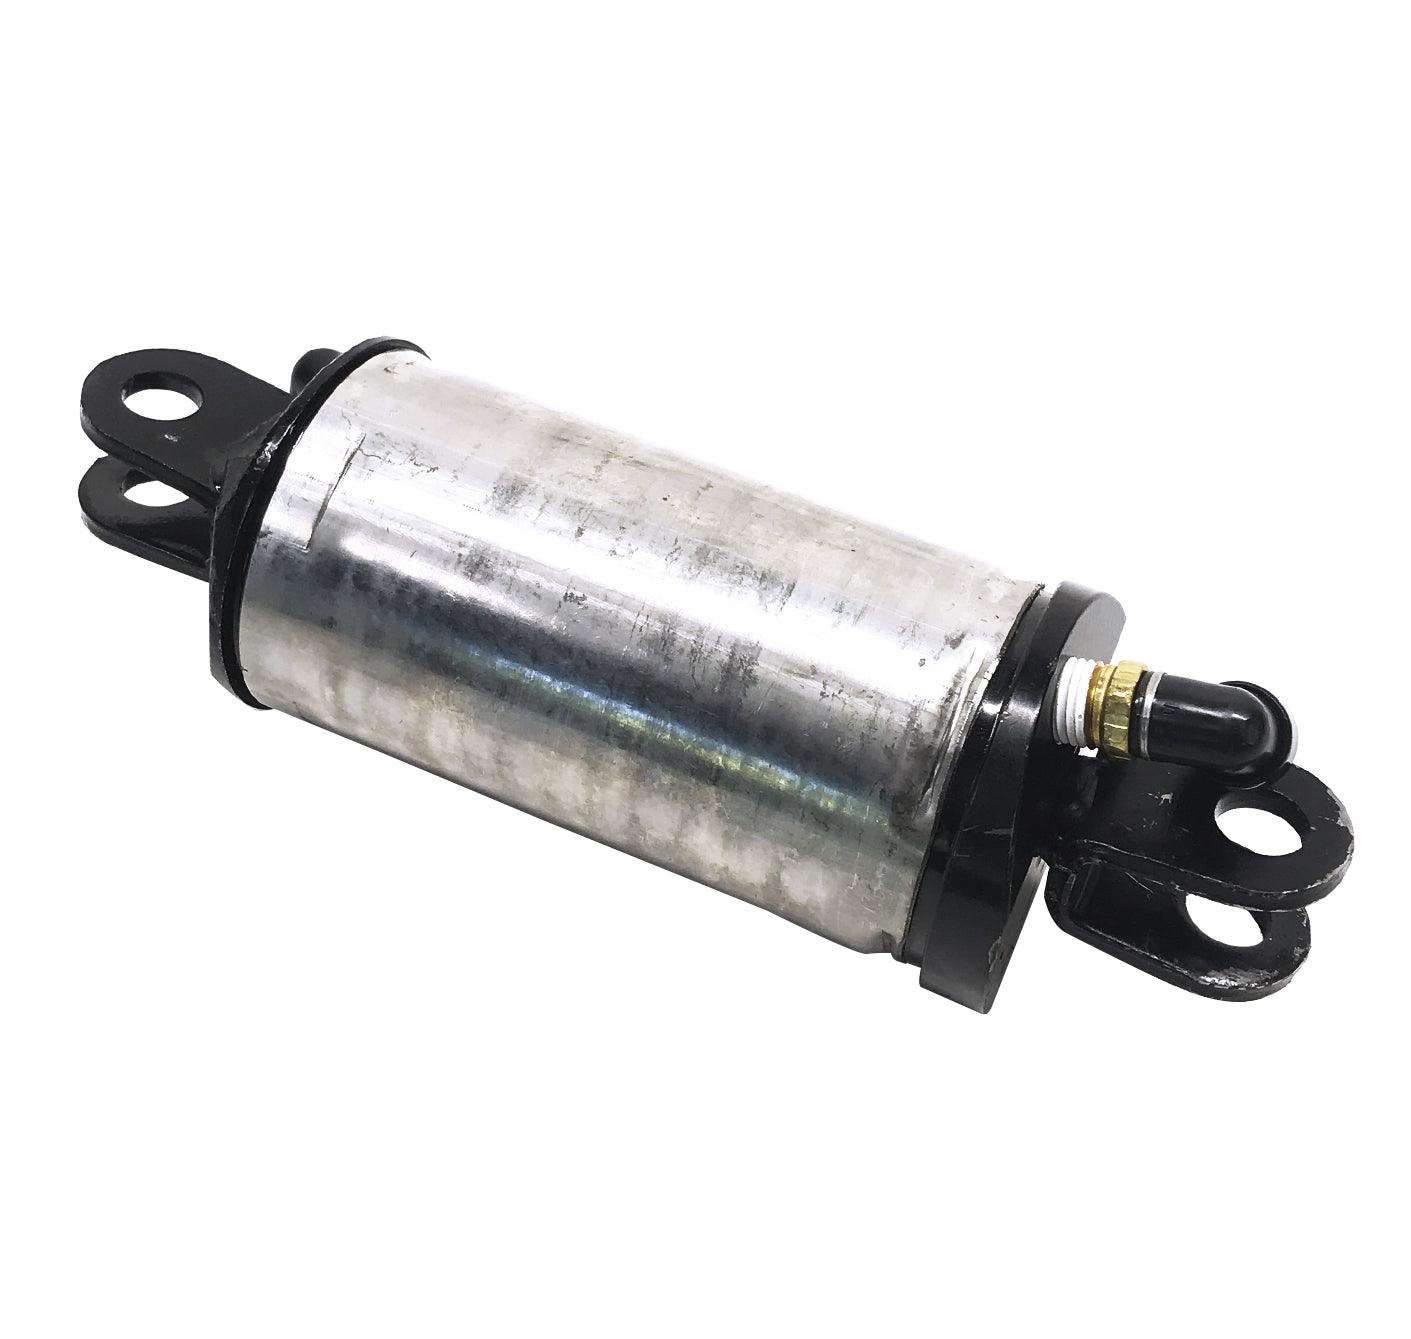 Pk-12057 Genuine Saf Holland® Air Cylinder S/A Packaged - ADVANCED TRUCK PARTS